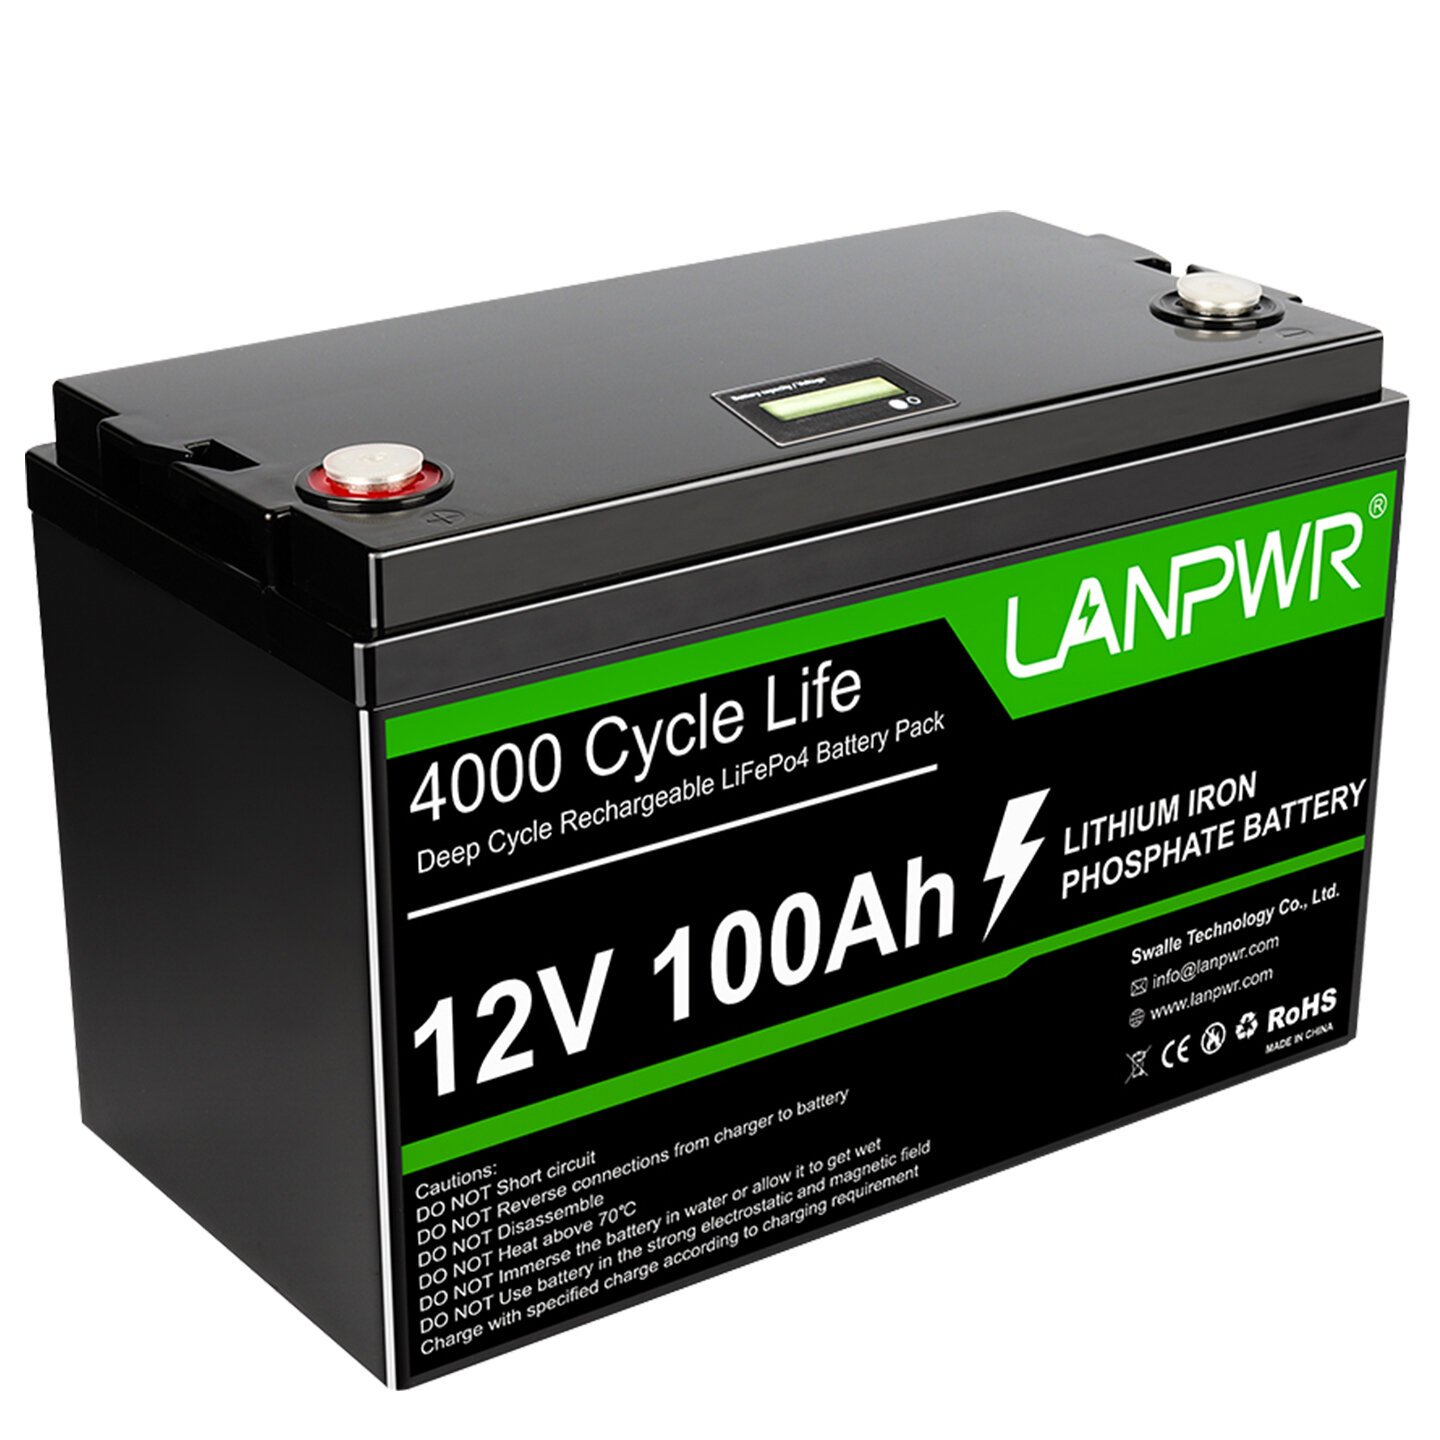 [EU Direct] LANPWR 12V 100Ah 1280W LiFePO4 Lithium Battery Pack Backup Power 1280Wh Energy 4000+ Deep Cycles Built-in 100A BMS 24.25lb Light Weight Support in Series Parallel for Replacing Most of Backup Power RV Boats Solar Trolling Motor Off-Grid